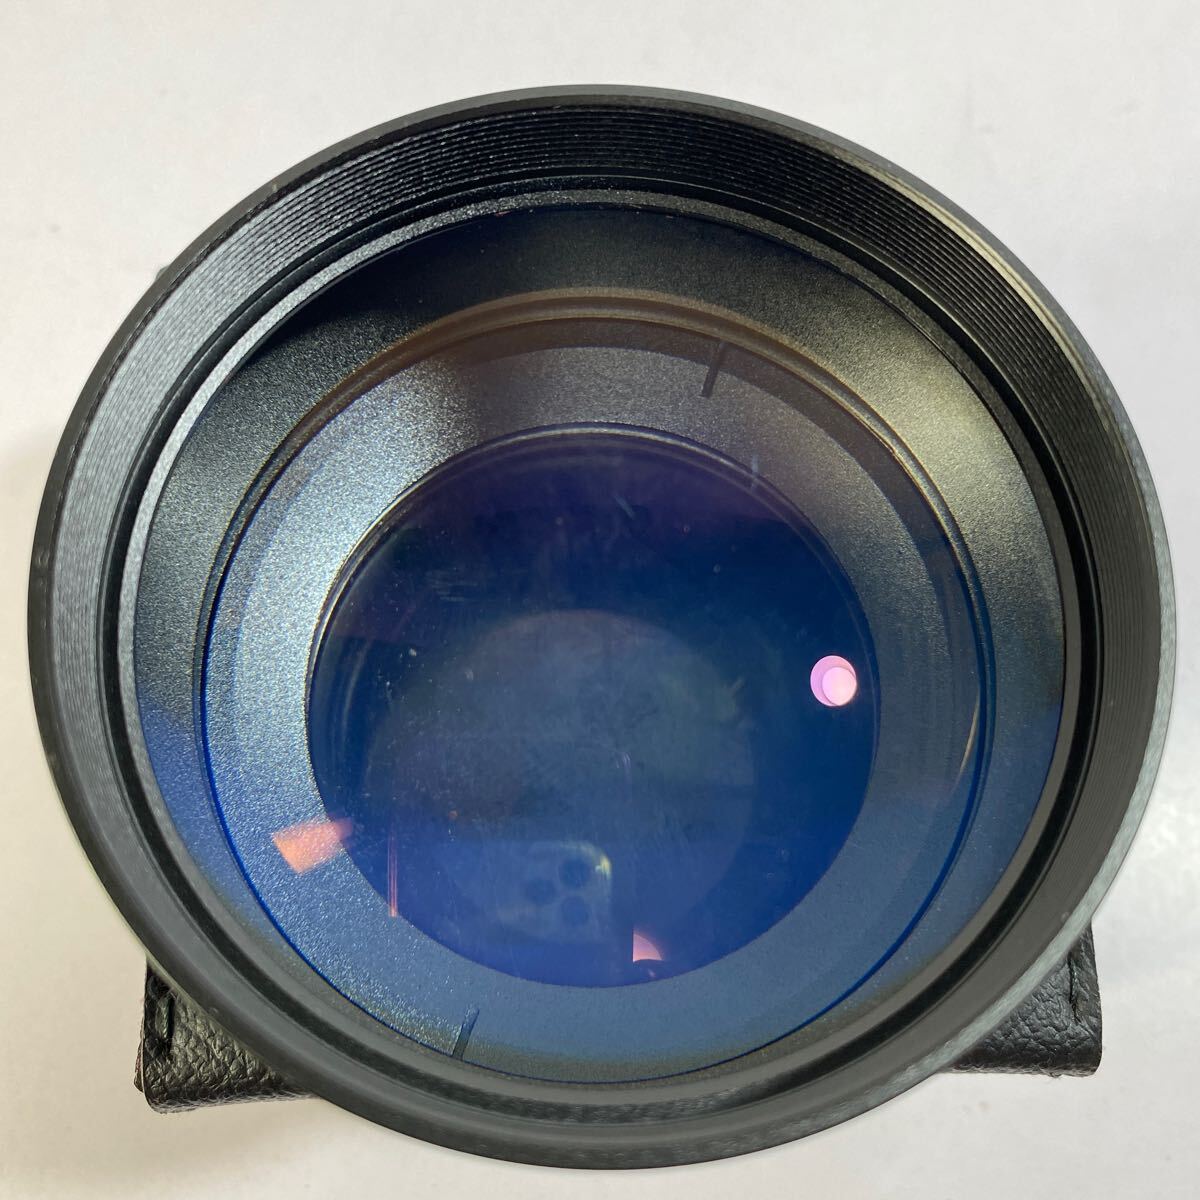 [9] Sony (SONY)tere conversion lens VCL-1546A